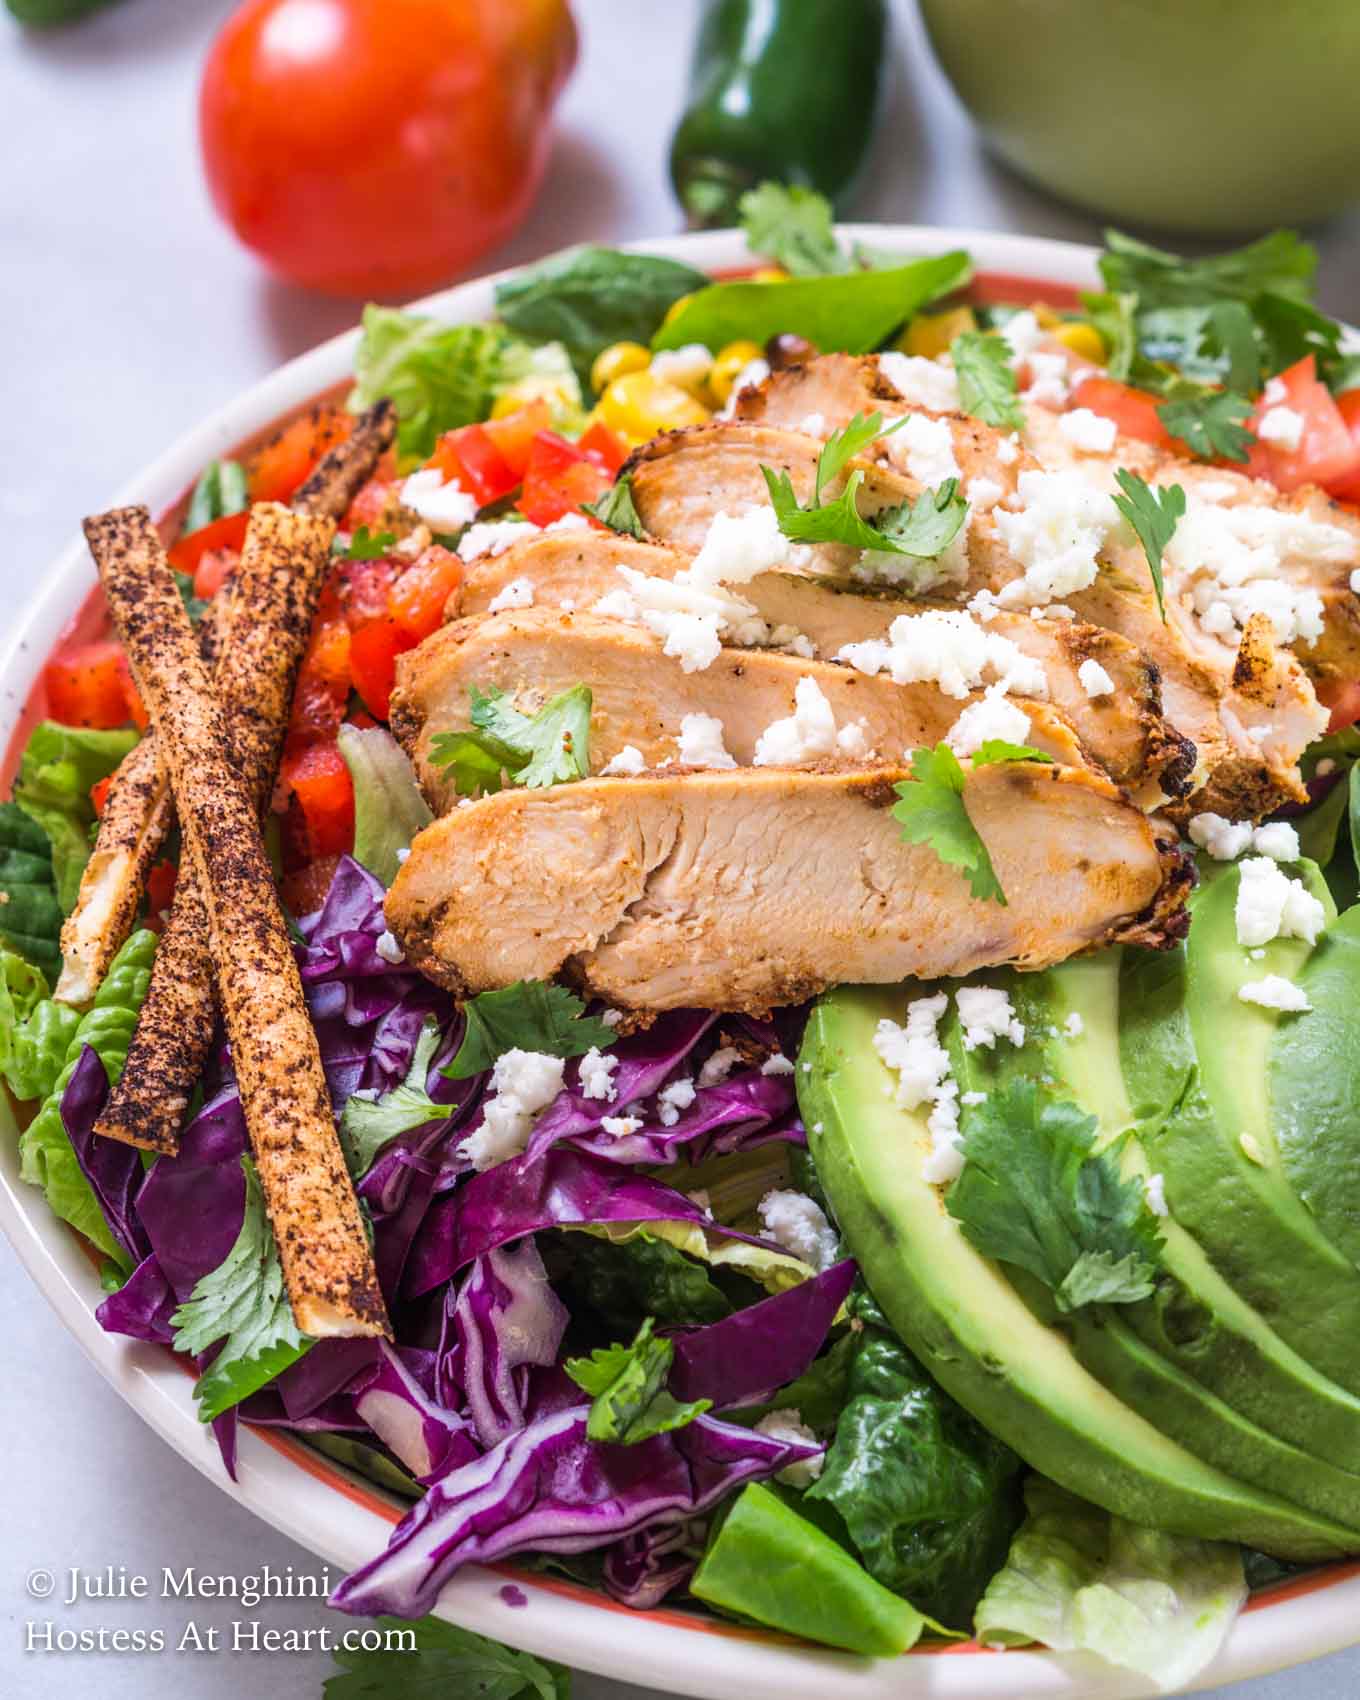 Angled view of a green salad topped with slices of chipotle grilled chicken, sliced avocado, shredded purple cabbage, diced tomato, grilled corn, and tortilla straws and then garnished with fresh cilantro. Fresh tomato and jalapenos sit in the background.